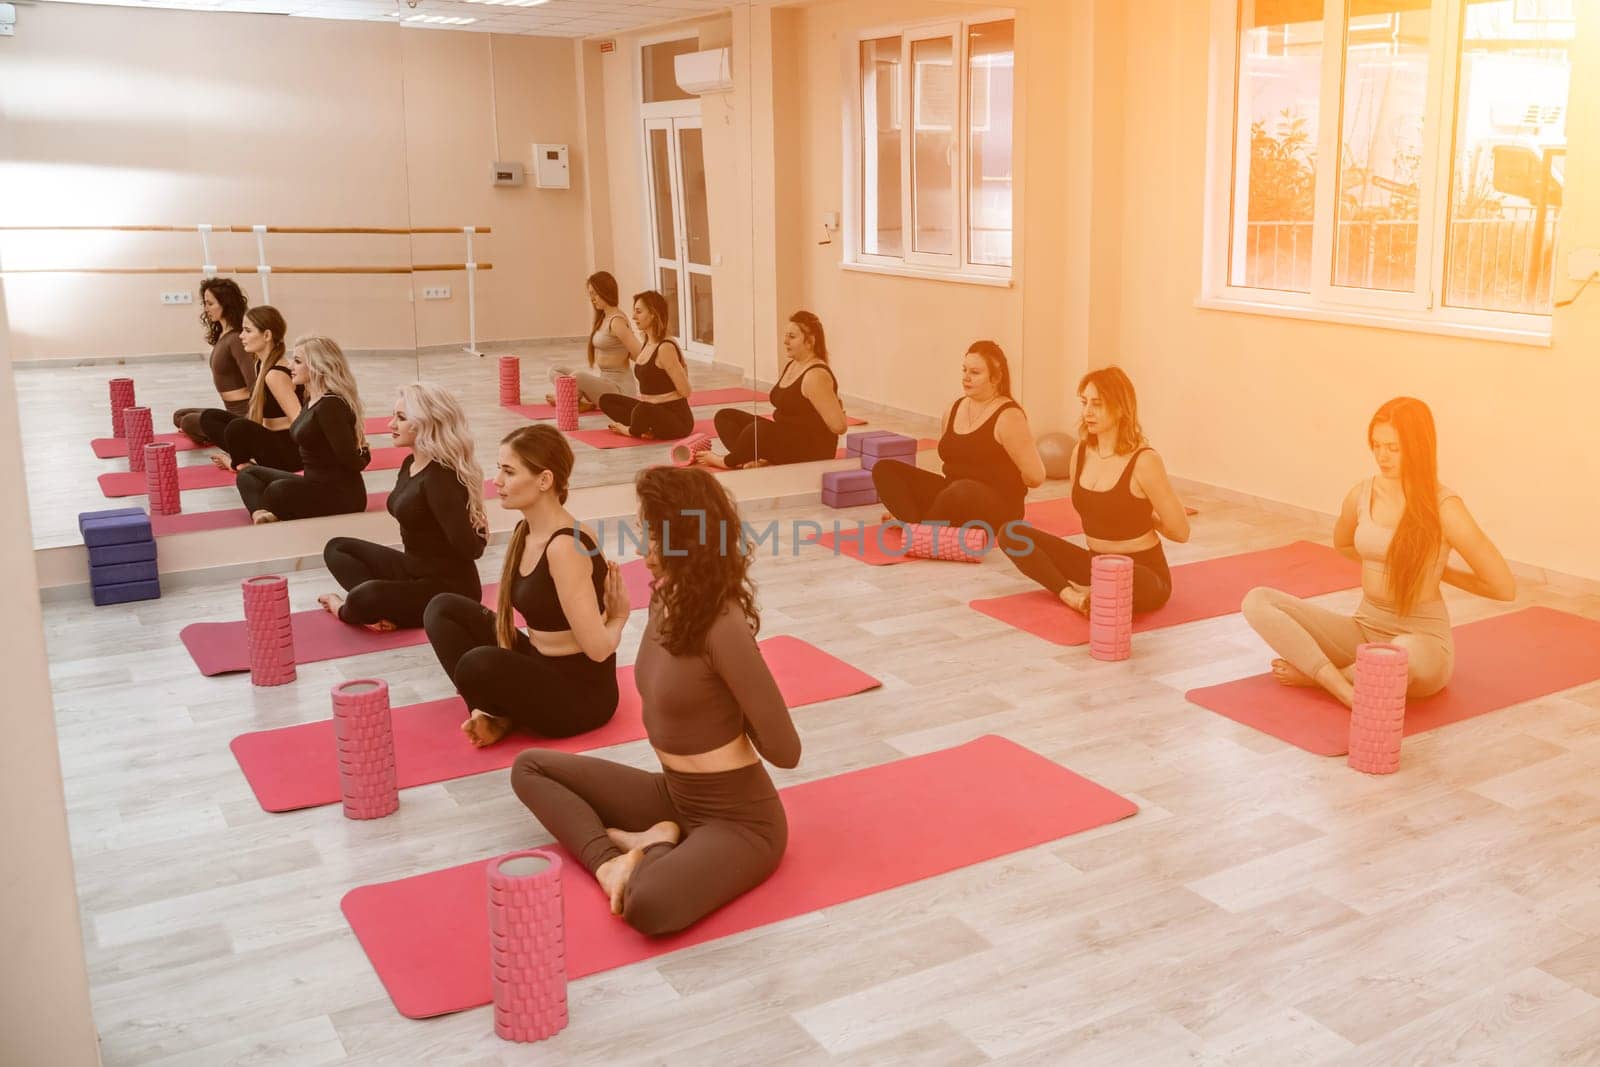 A group of six athletic women doing pilates or yoga on pink mats in front of a window in a beige loft studio interior. Teamwork, good mood and healthy lifestyle concept